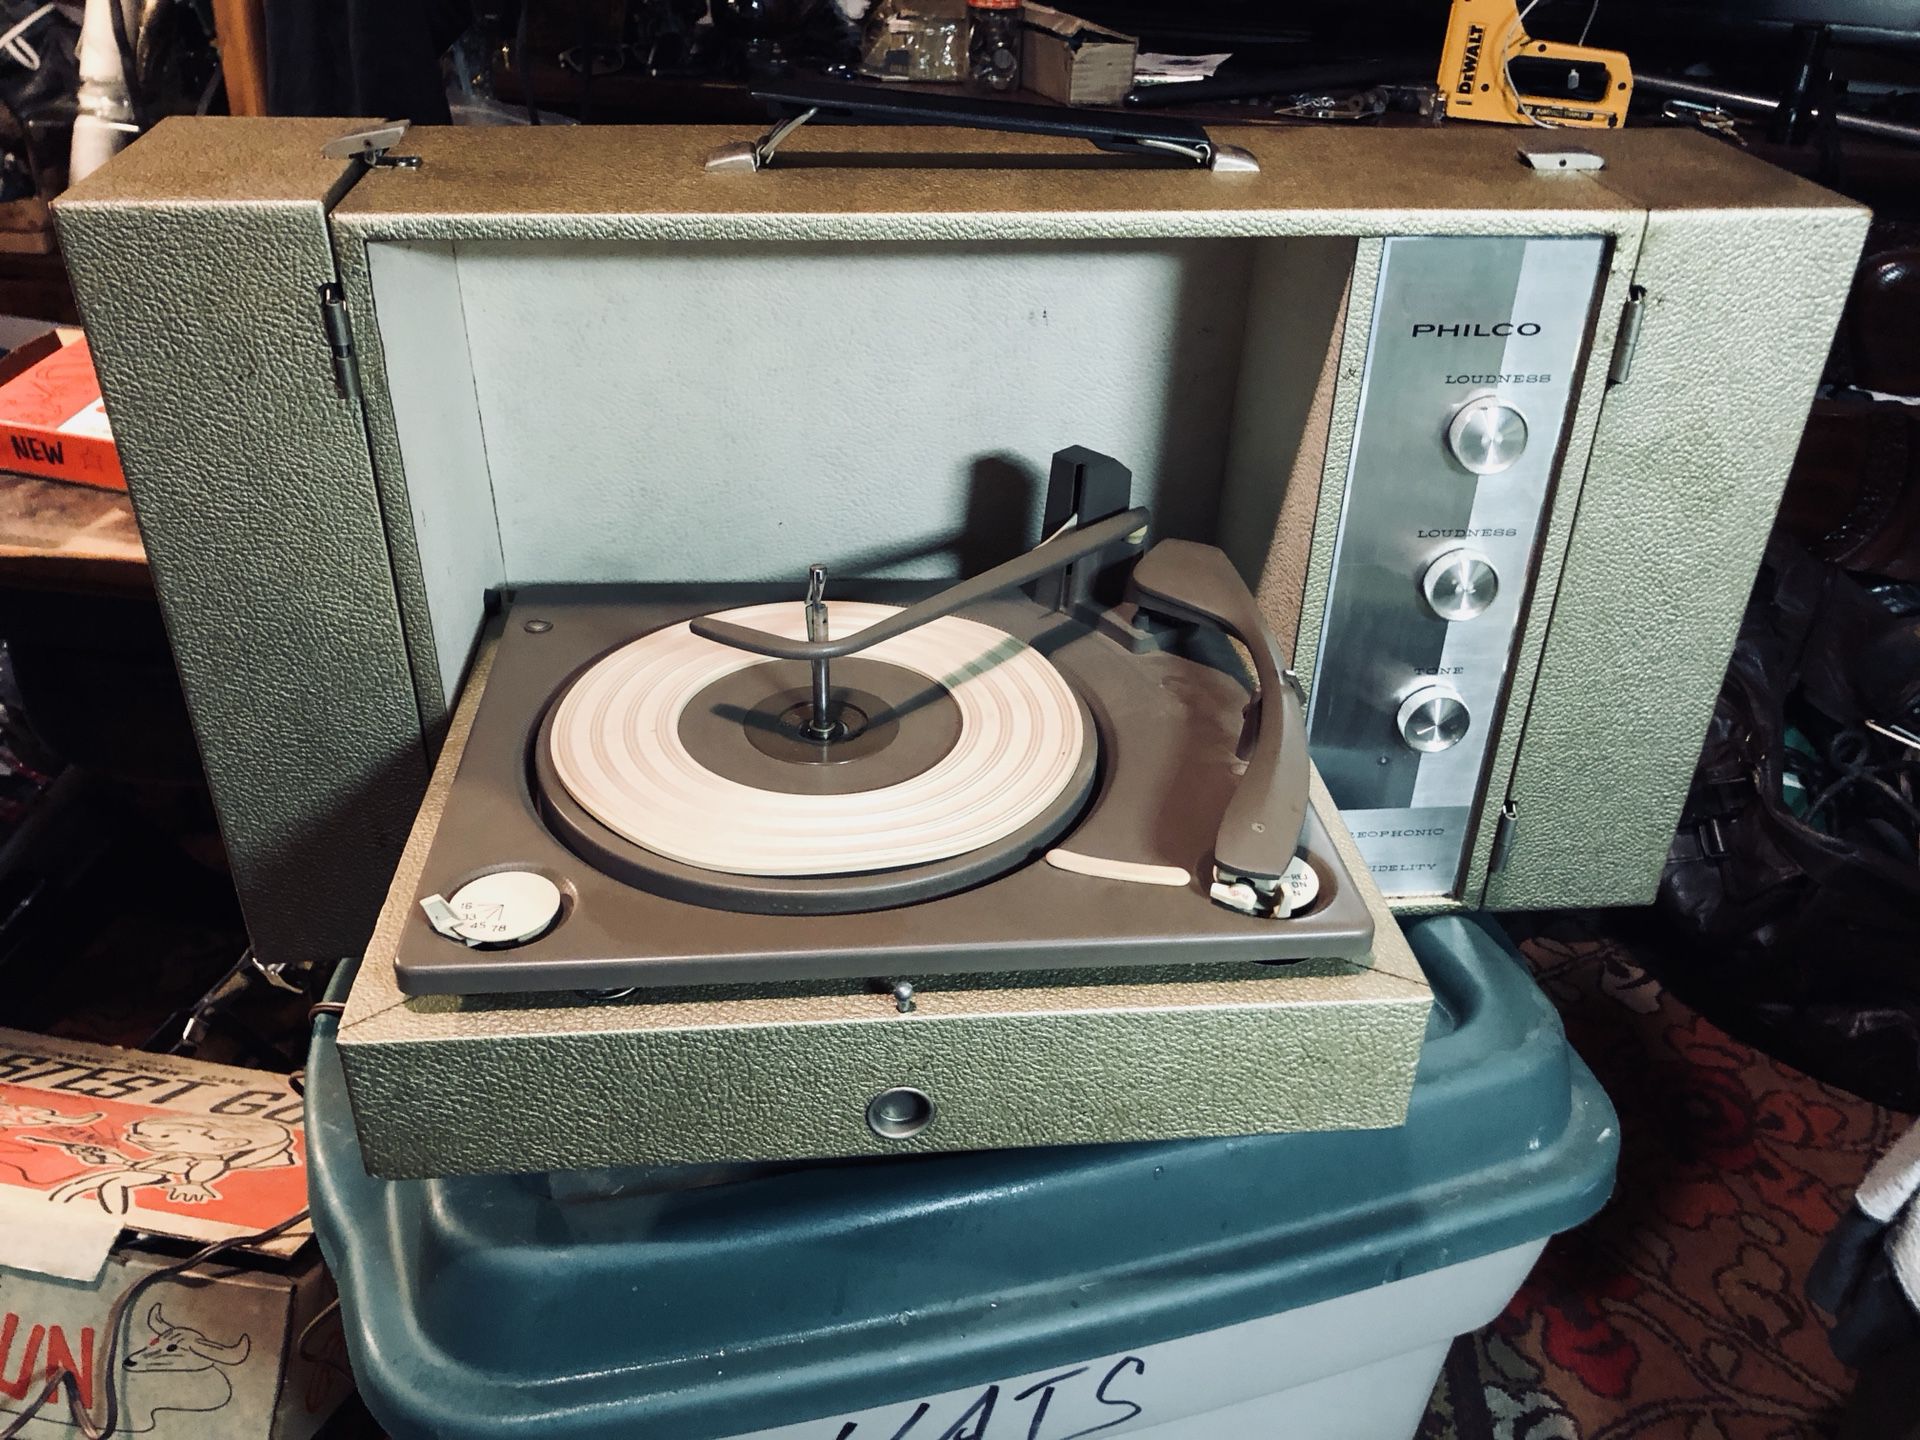 Vintage Philco portable record player with detachable speakers works great!! Extremely Rare!!!!!!